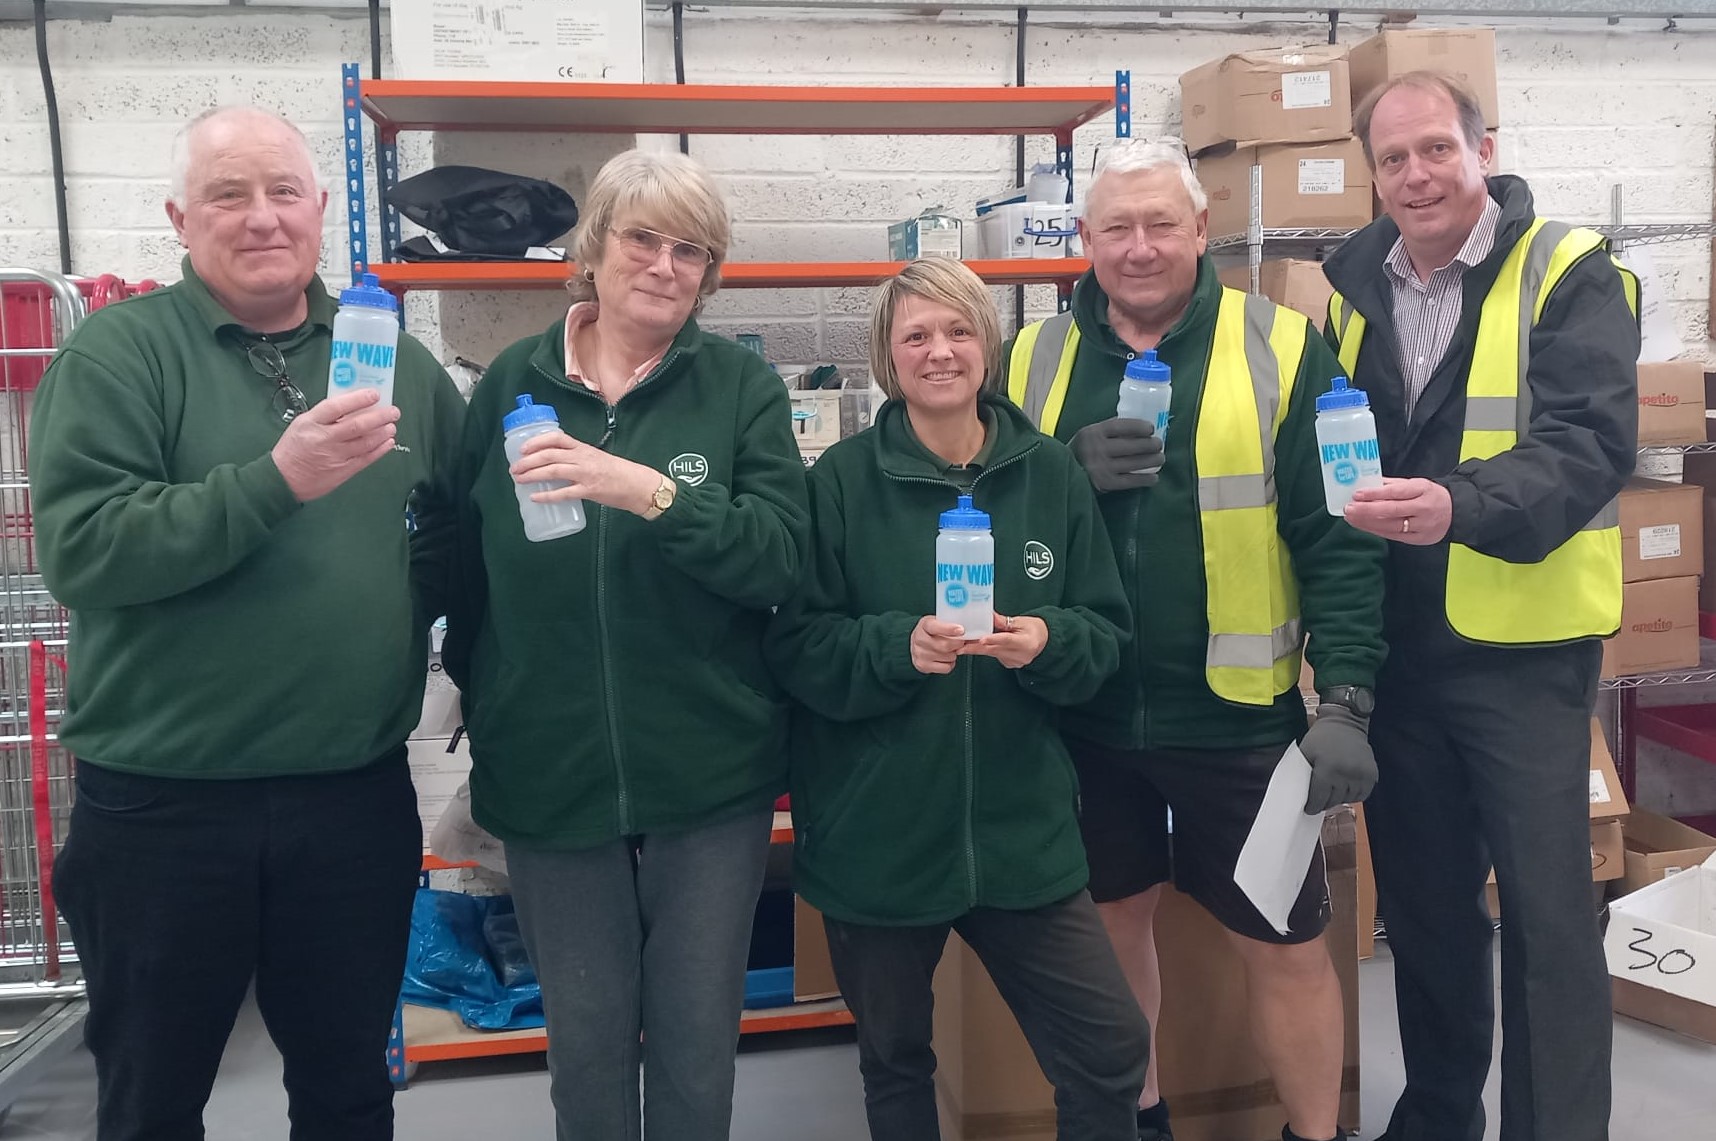 HILS staff standing together and smiling, each holding a Southern Water clear drinking bottle